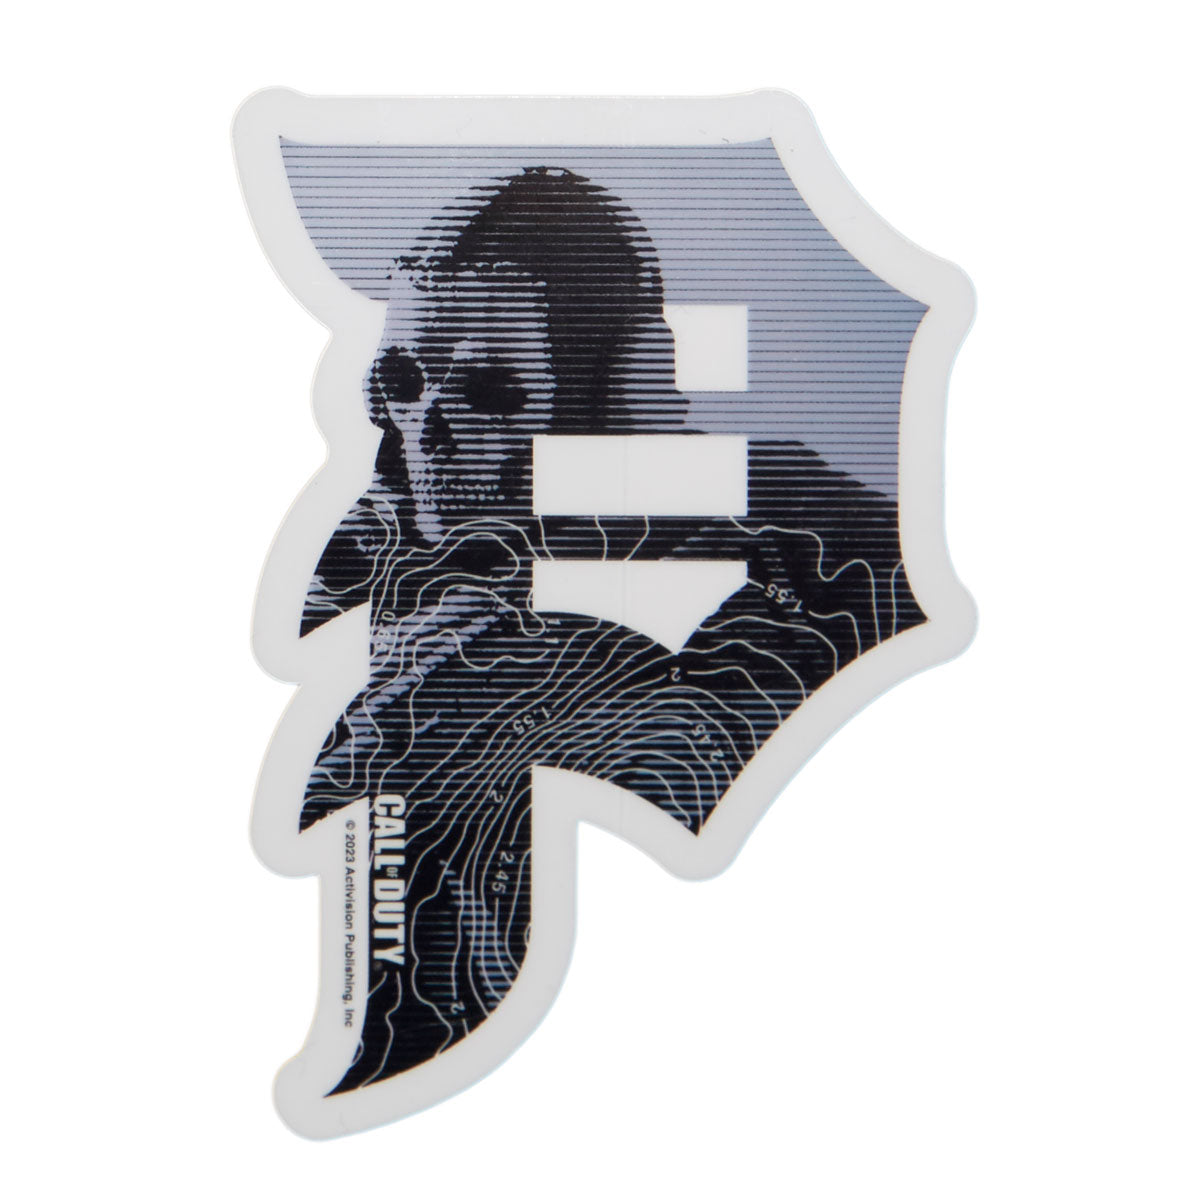 Primitive x Call of Duty Mapping Dirty P Stickers - Clear image 1